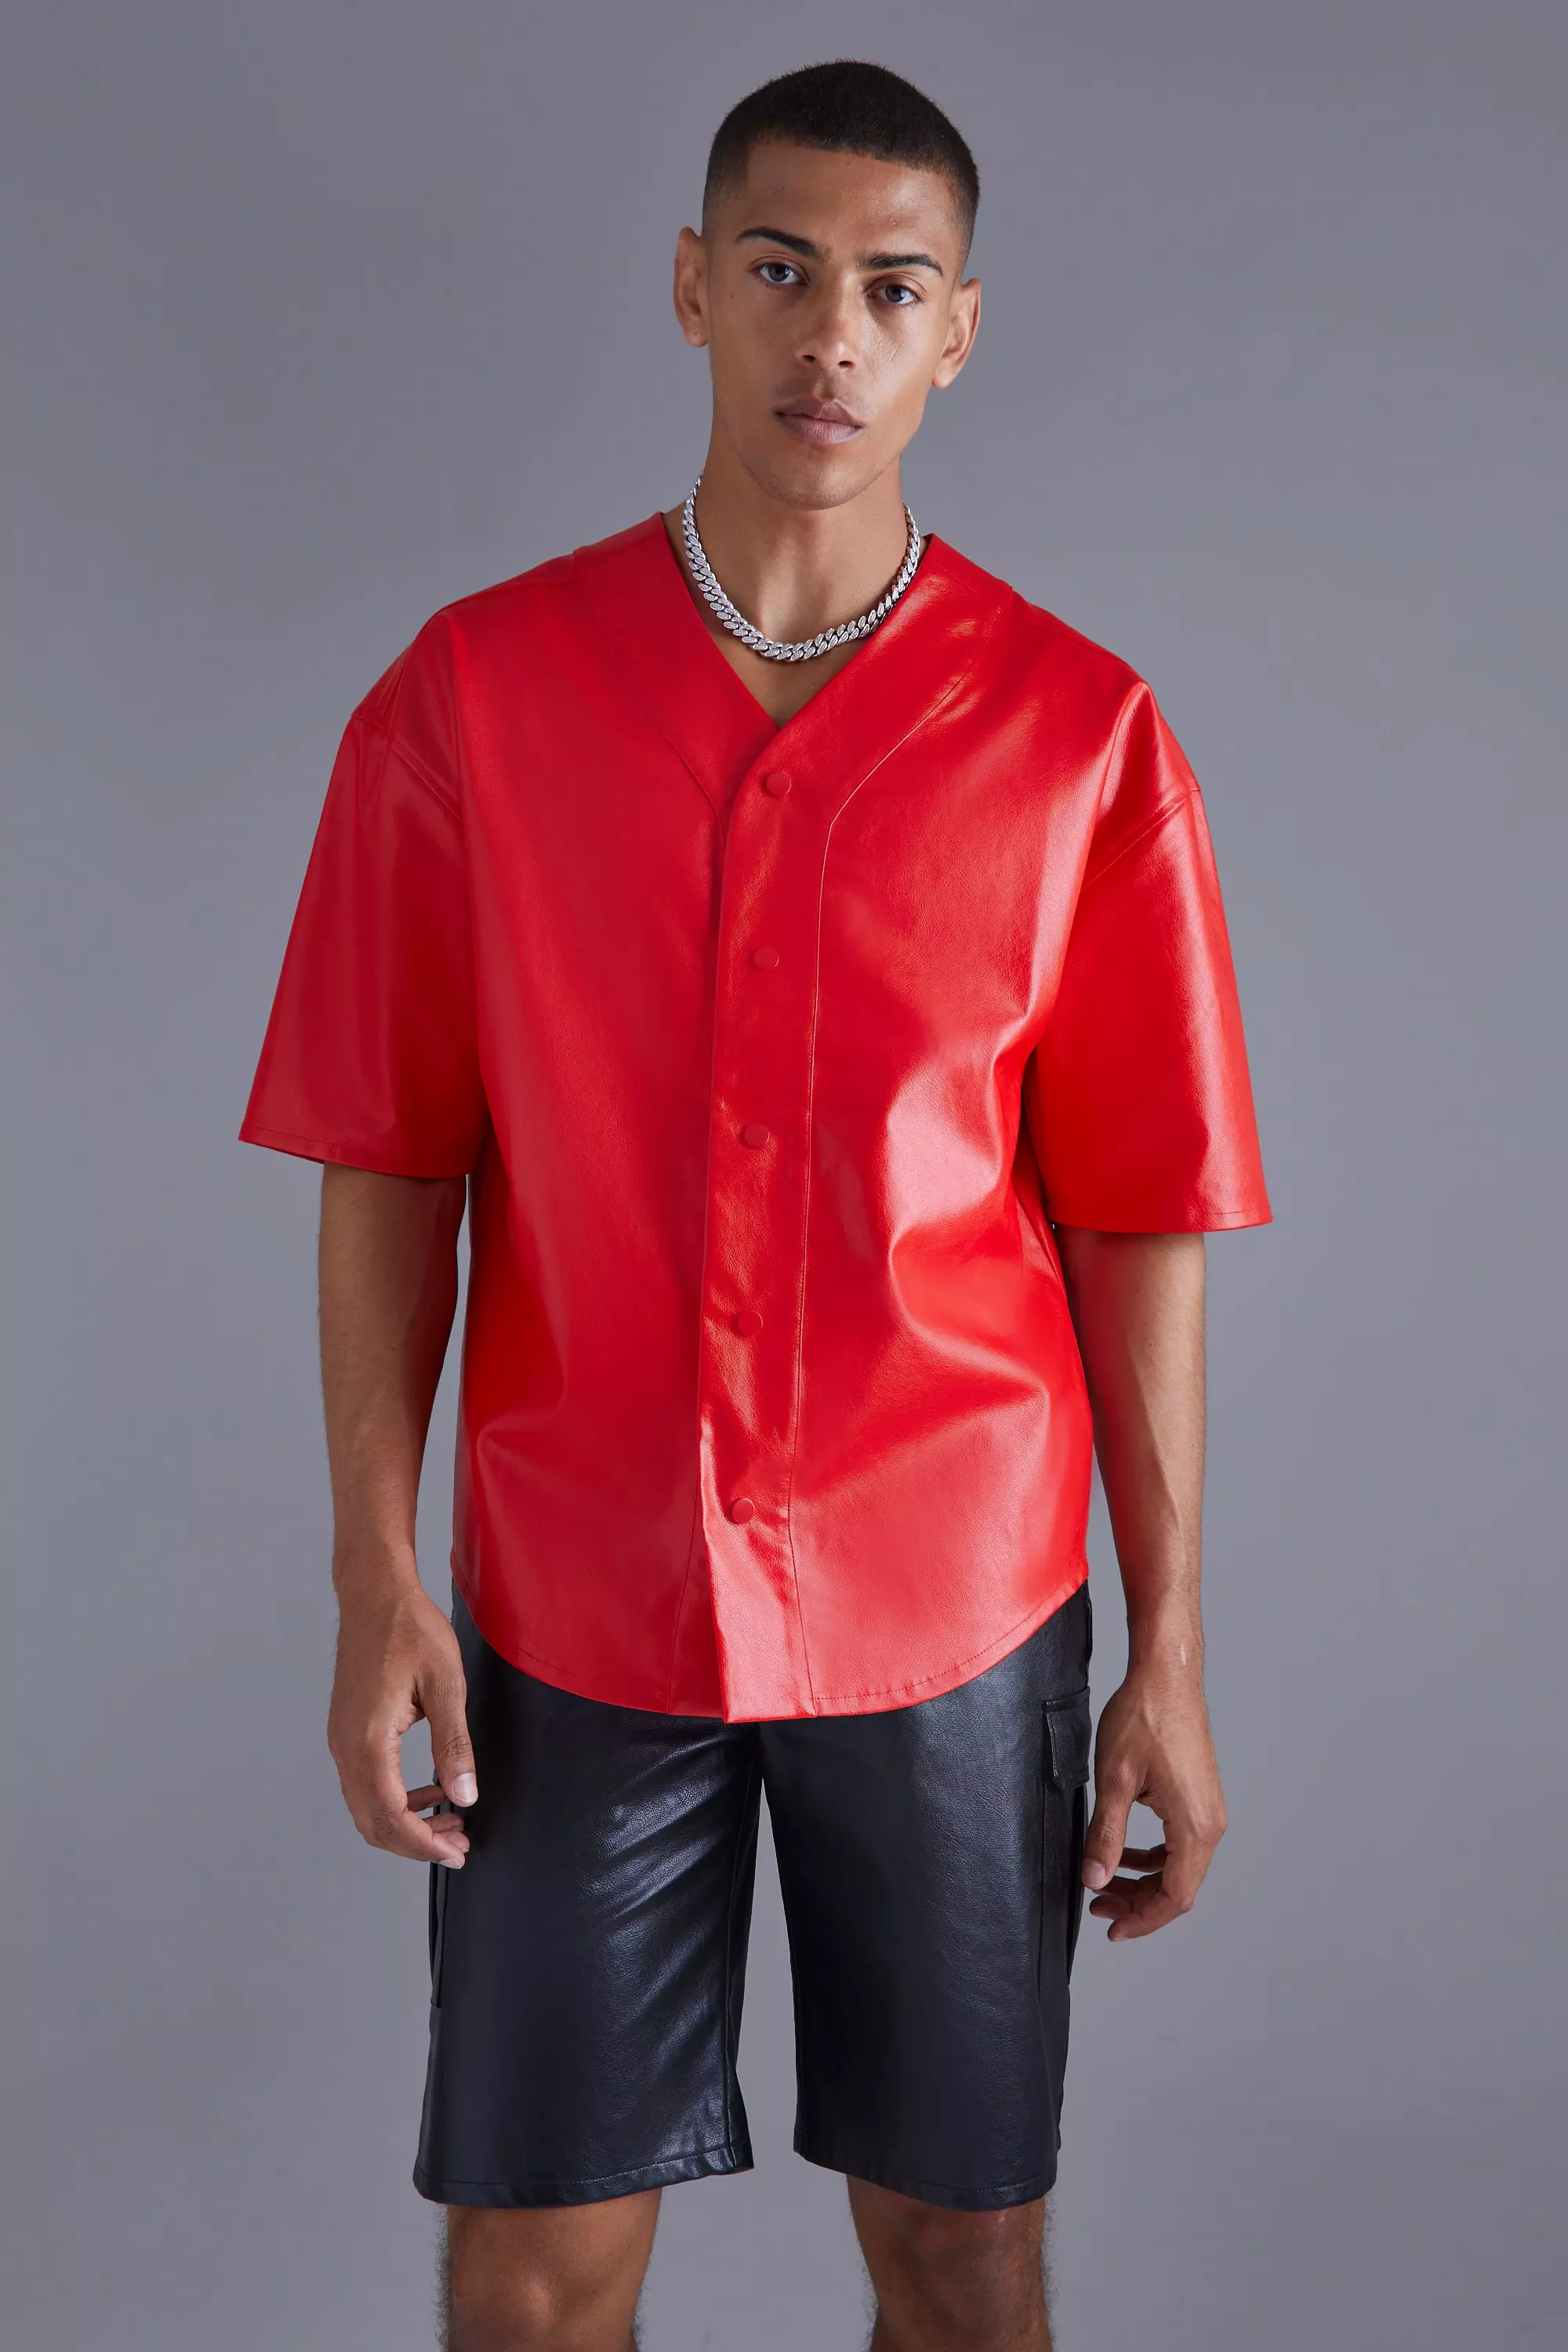 Mens Red Leather Baseball Jersey